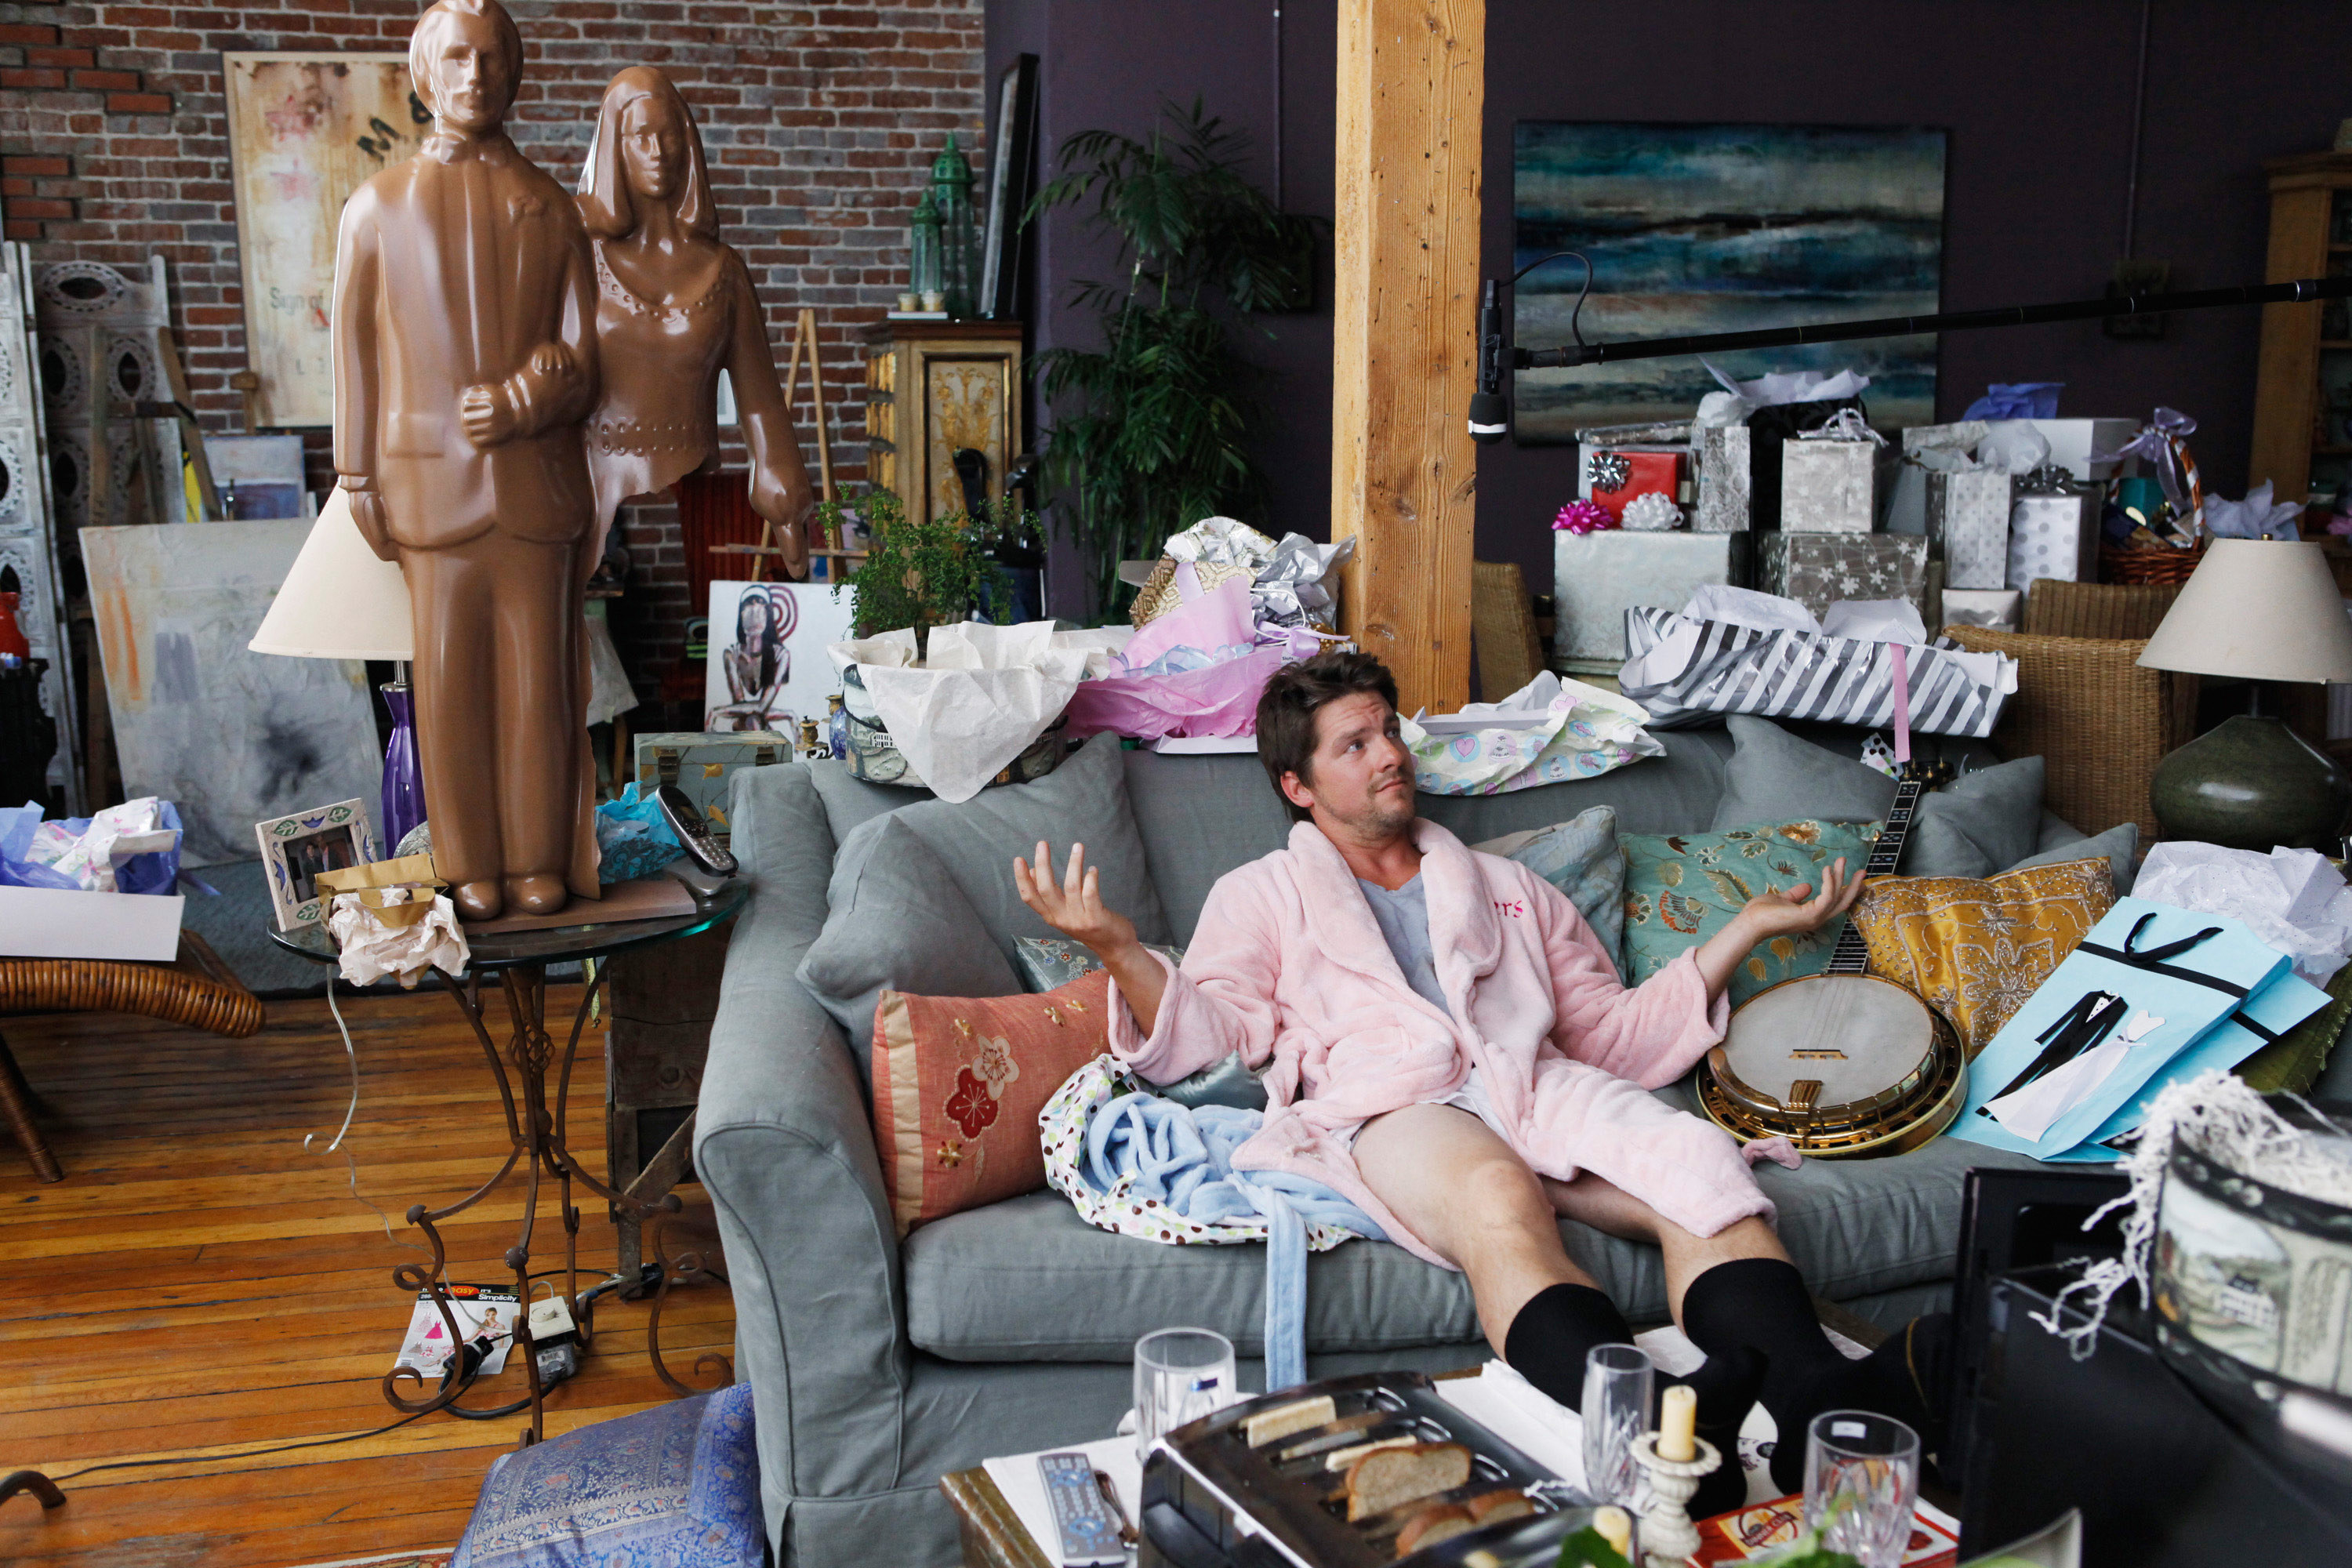 Zachary Knighton shrugging in a pink bathrobe while sitting on the couch.